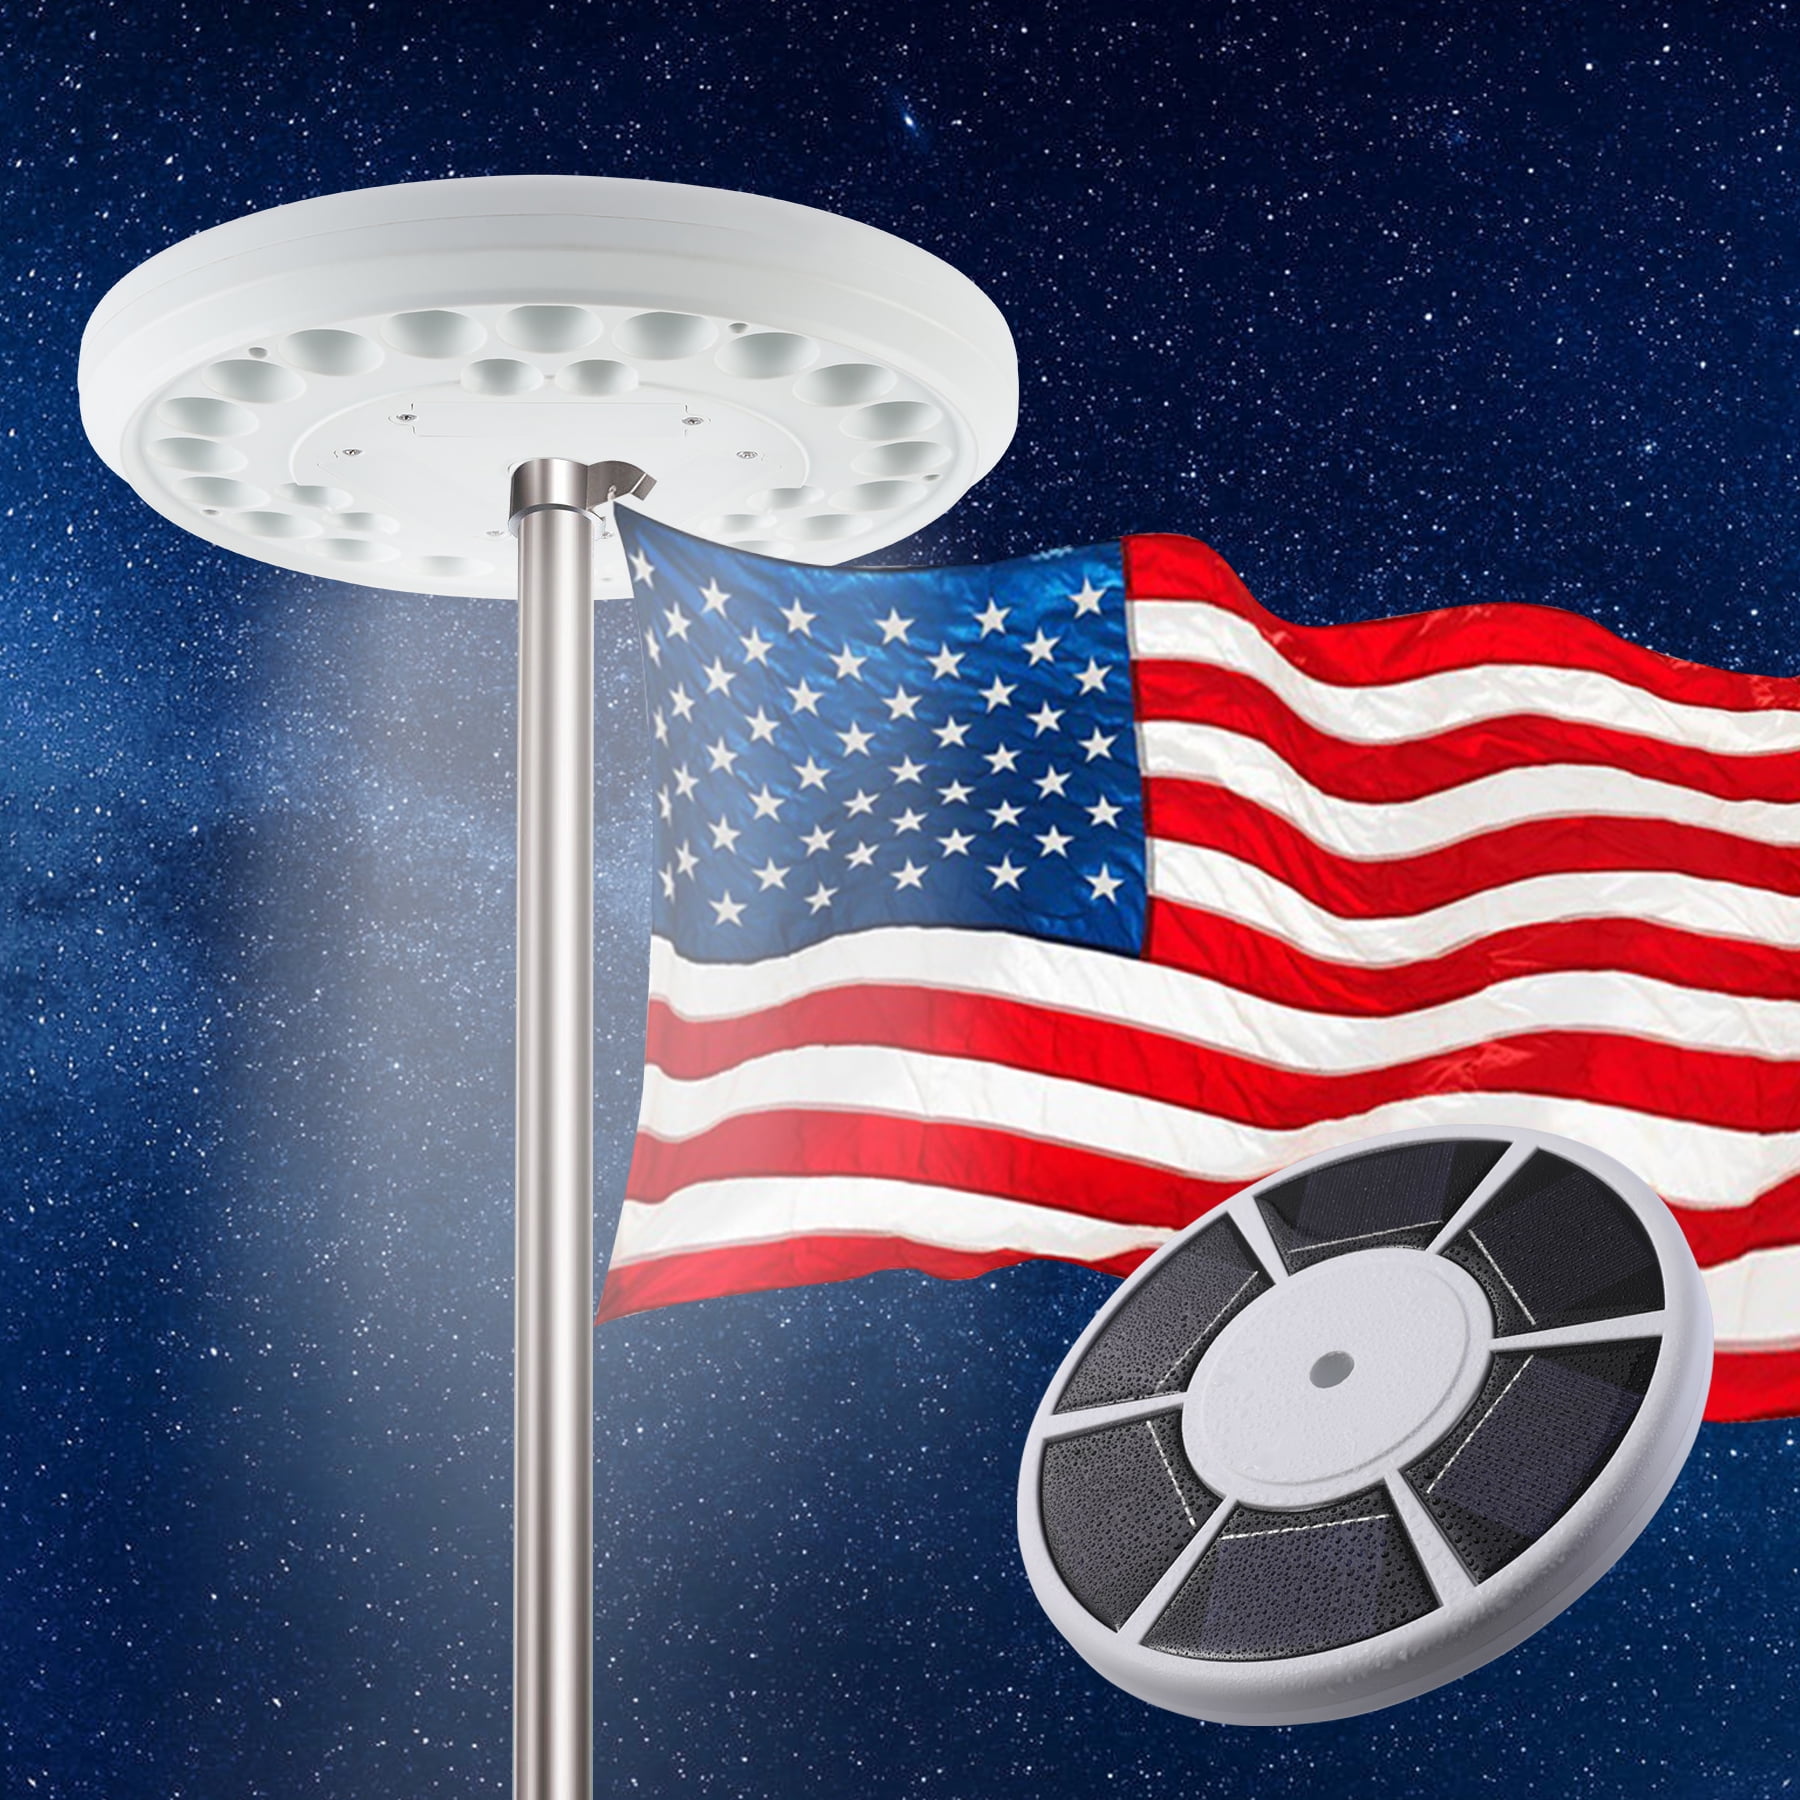 - Brightest Longest-lasting & Most Flag Coverage with Exclusive Sunnytech Technology Most Powerful Solar Flag Pole Flagpole Light By Sunnytech Top-rated Flag Light on LED Downlight Lights up Flags on Most 15 to 25 F Designed & Packaged in the U.s.a 